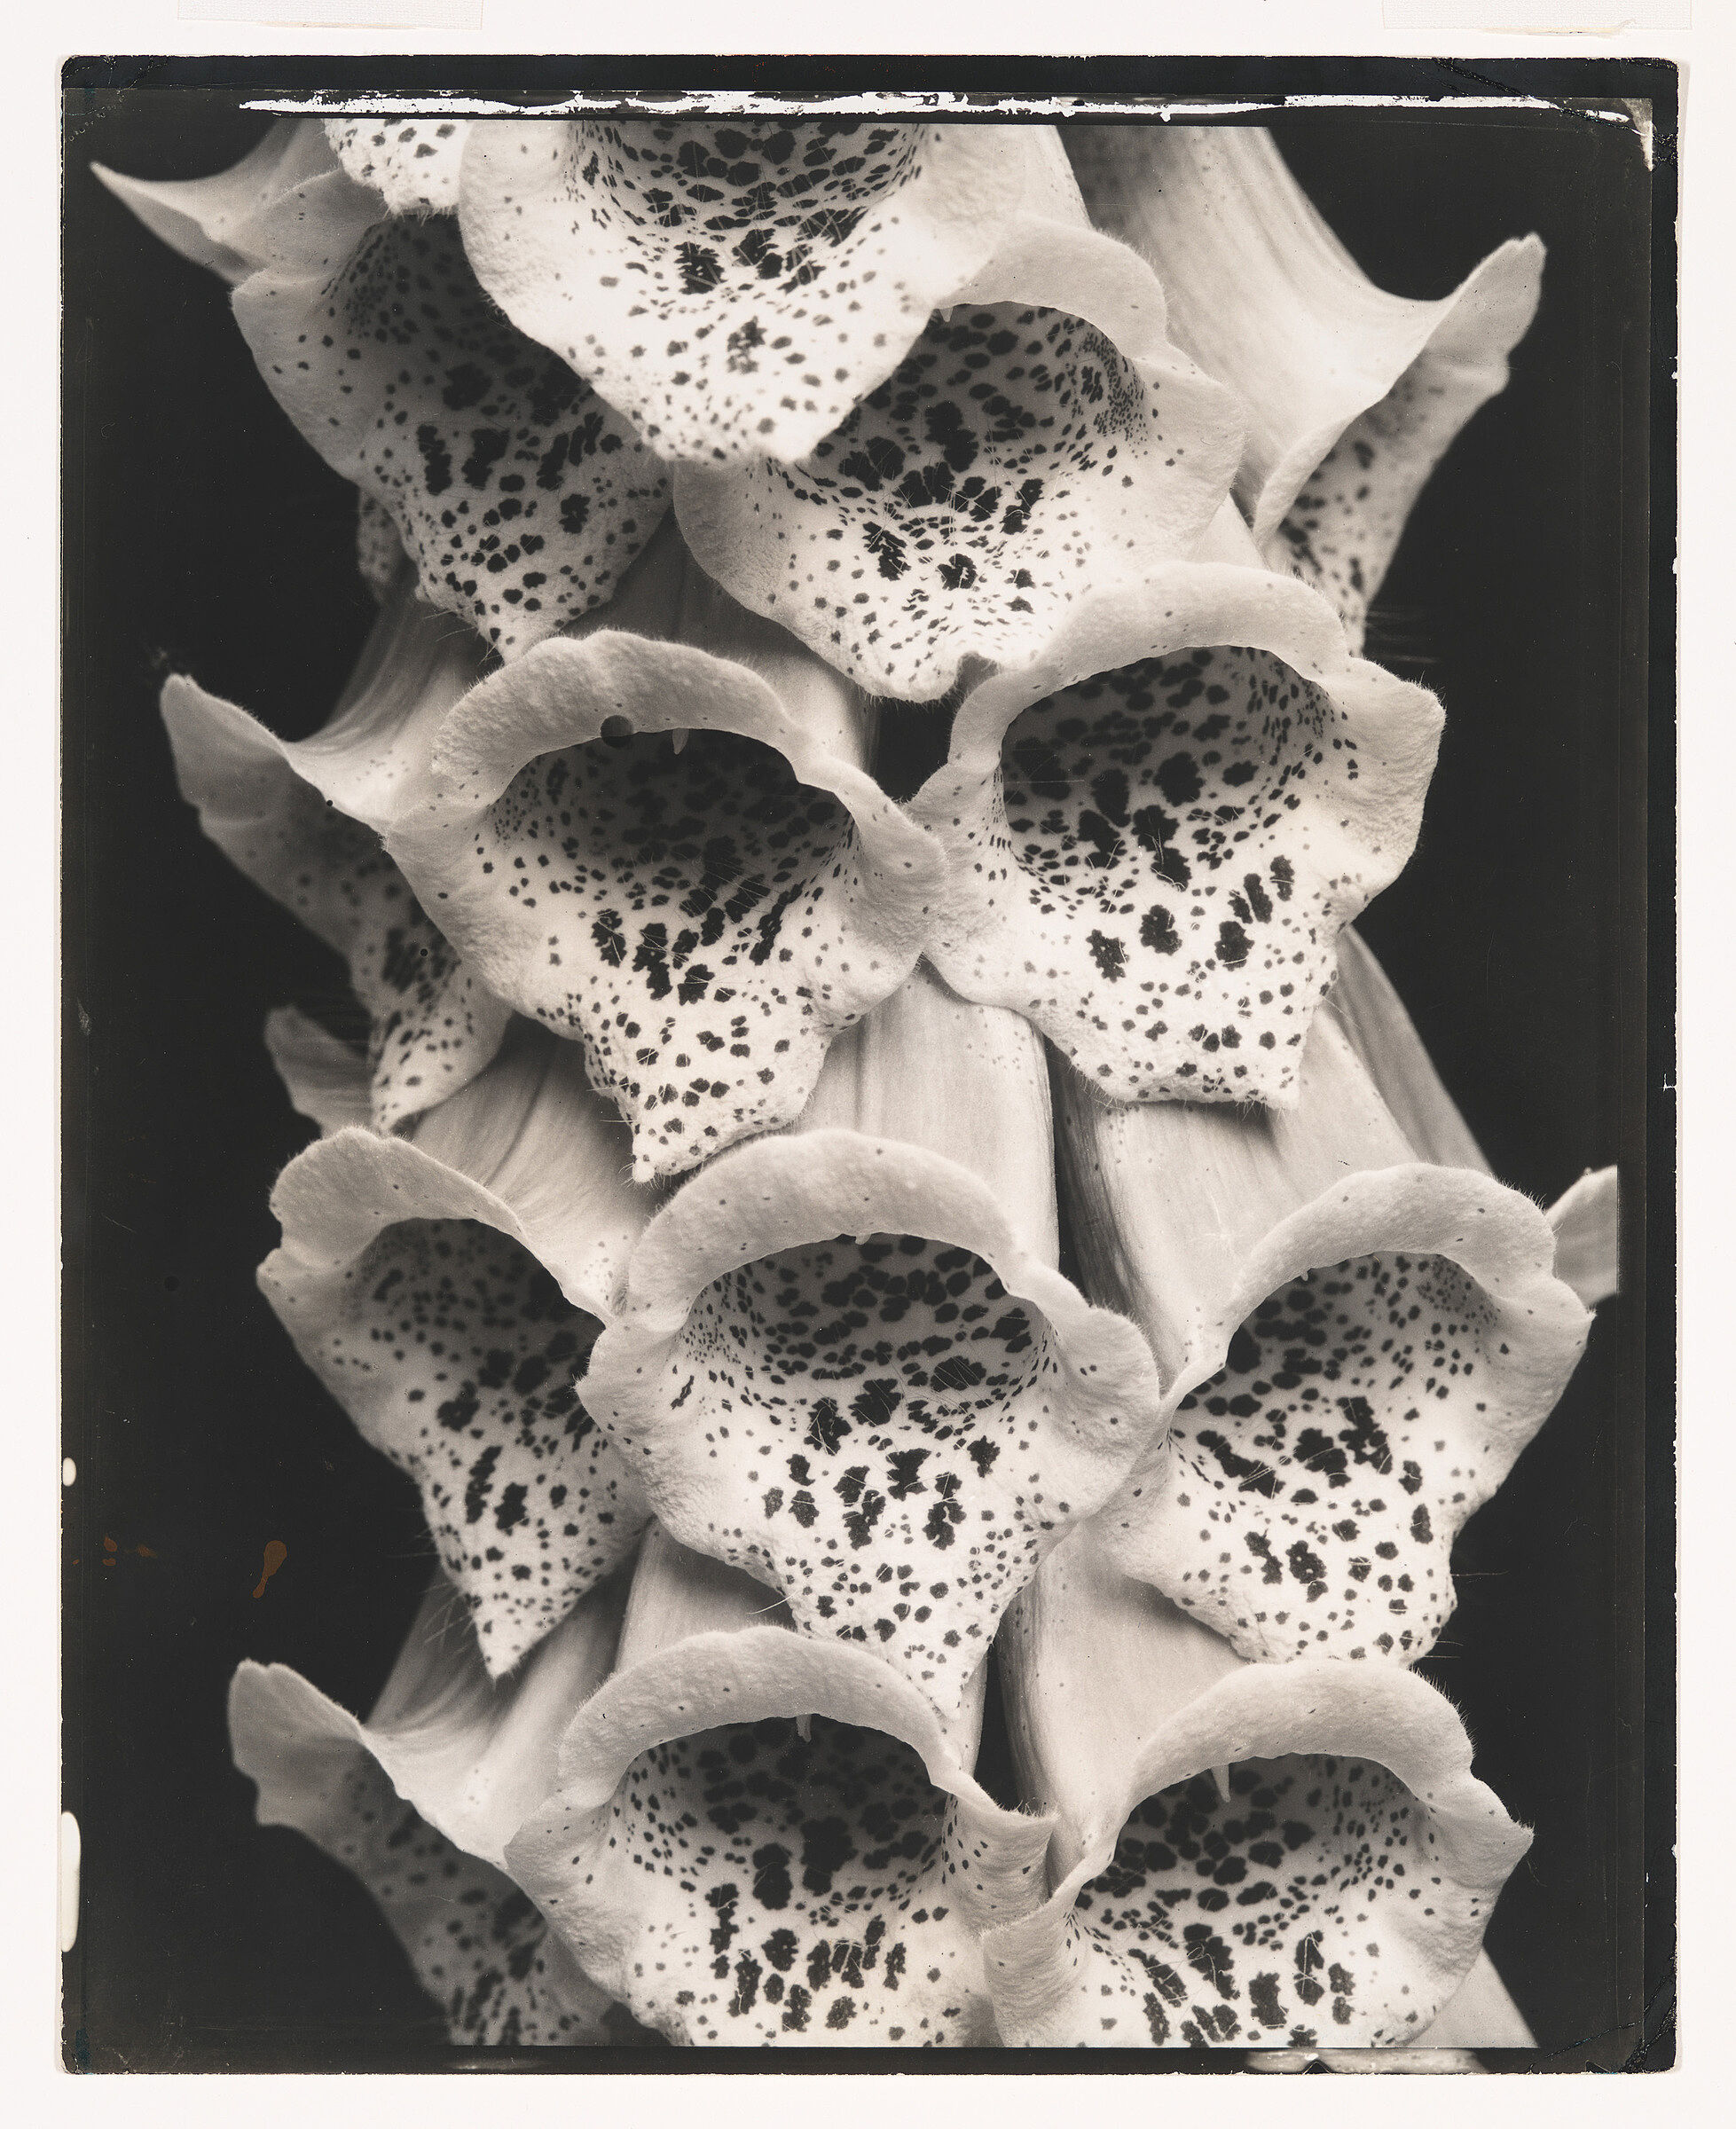 Stacked flowers in a black and white photograph.